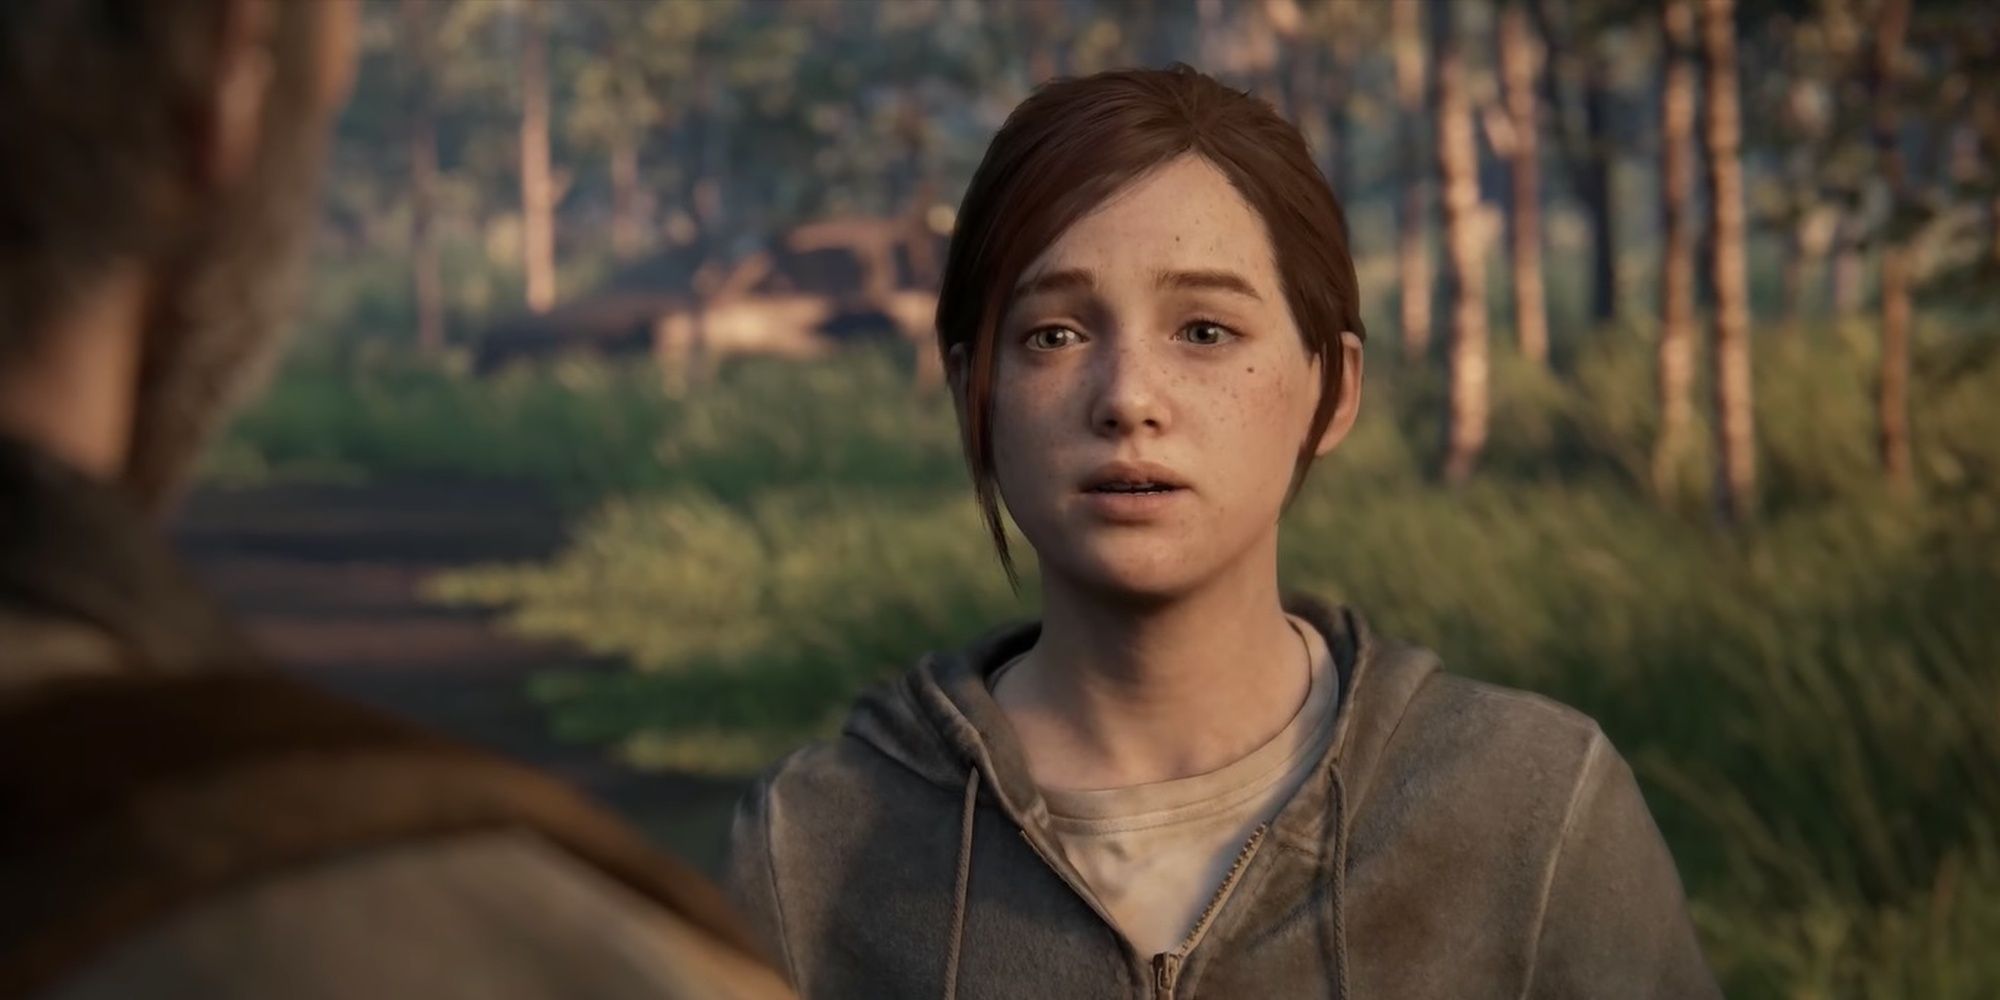 Ellie confronts Joel about the Fireflies in The Last of Us Part 2